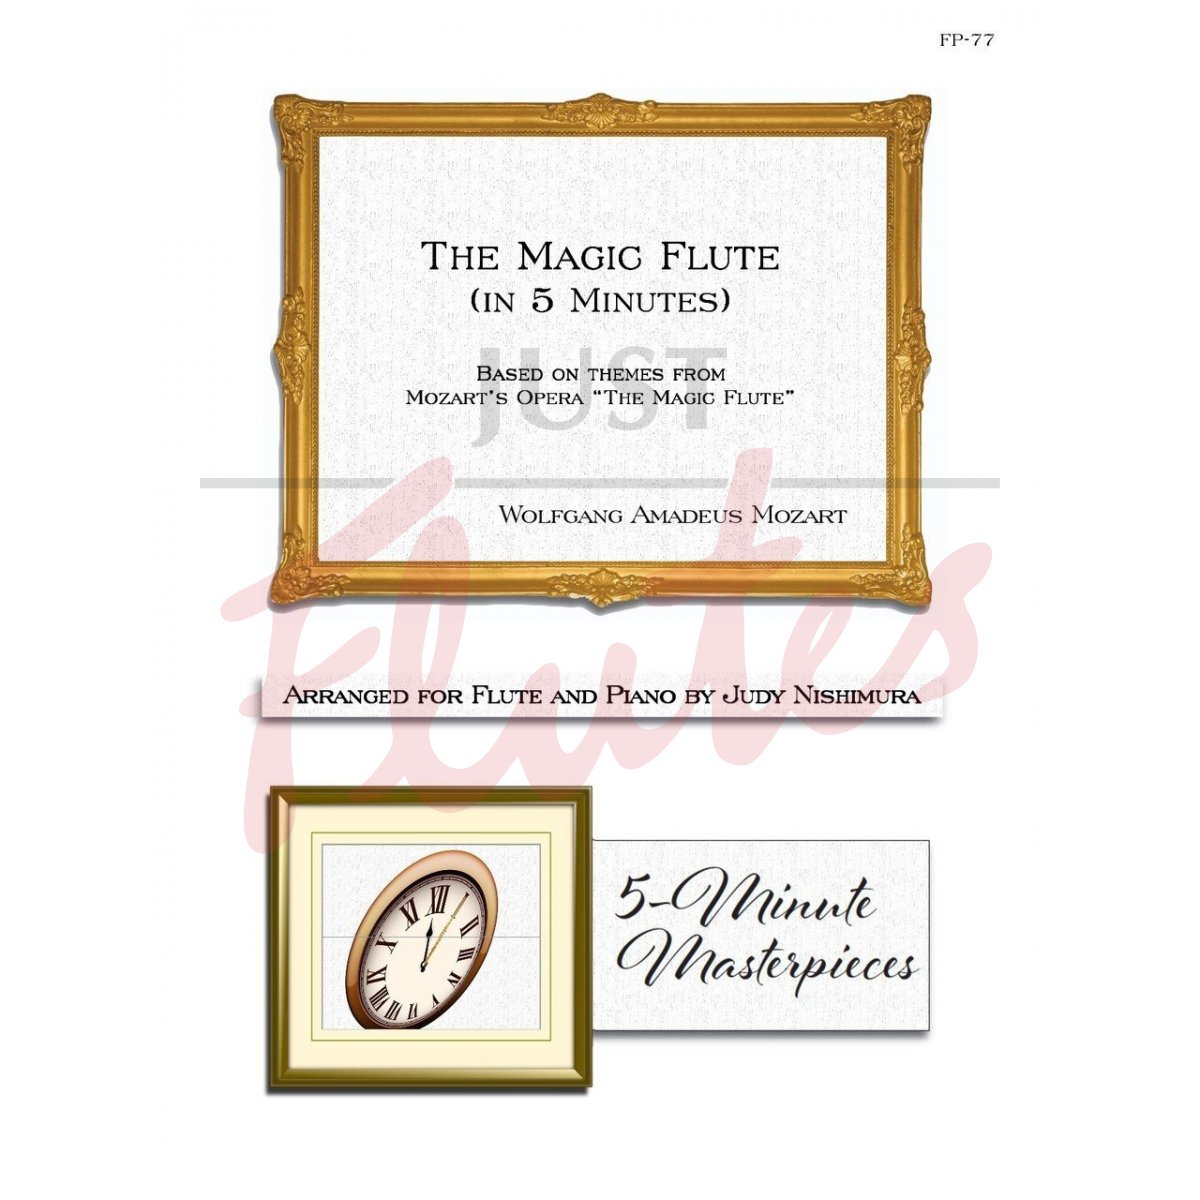 The Magic Flute (in 5 Minutes) for Flute and Piano